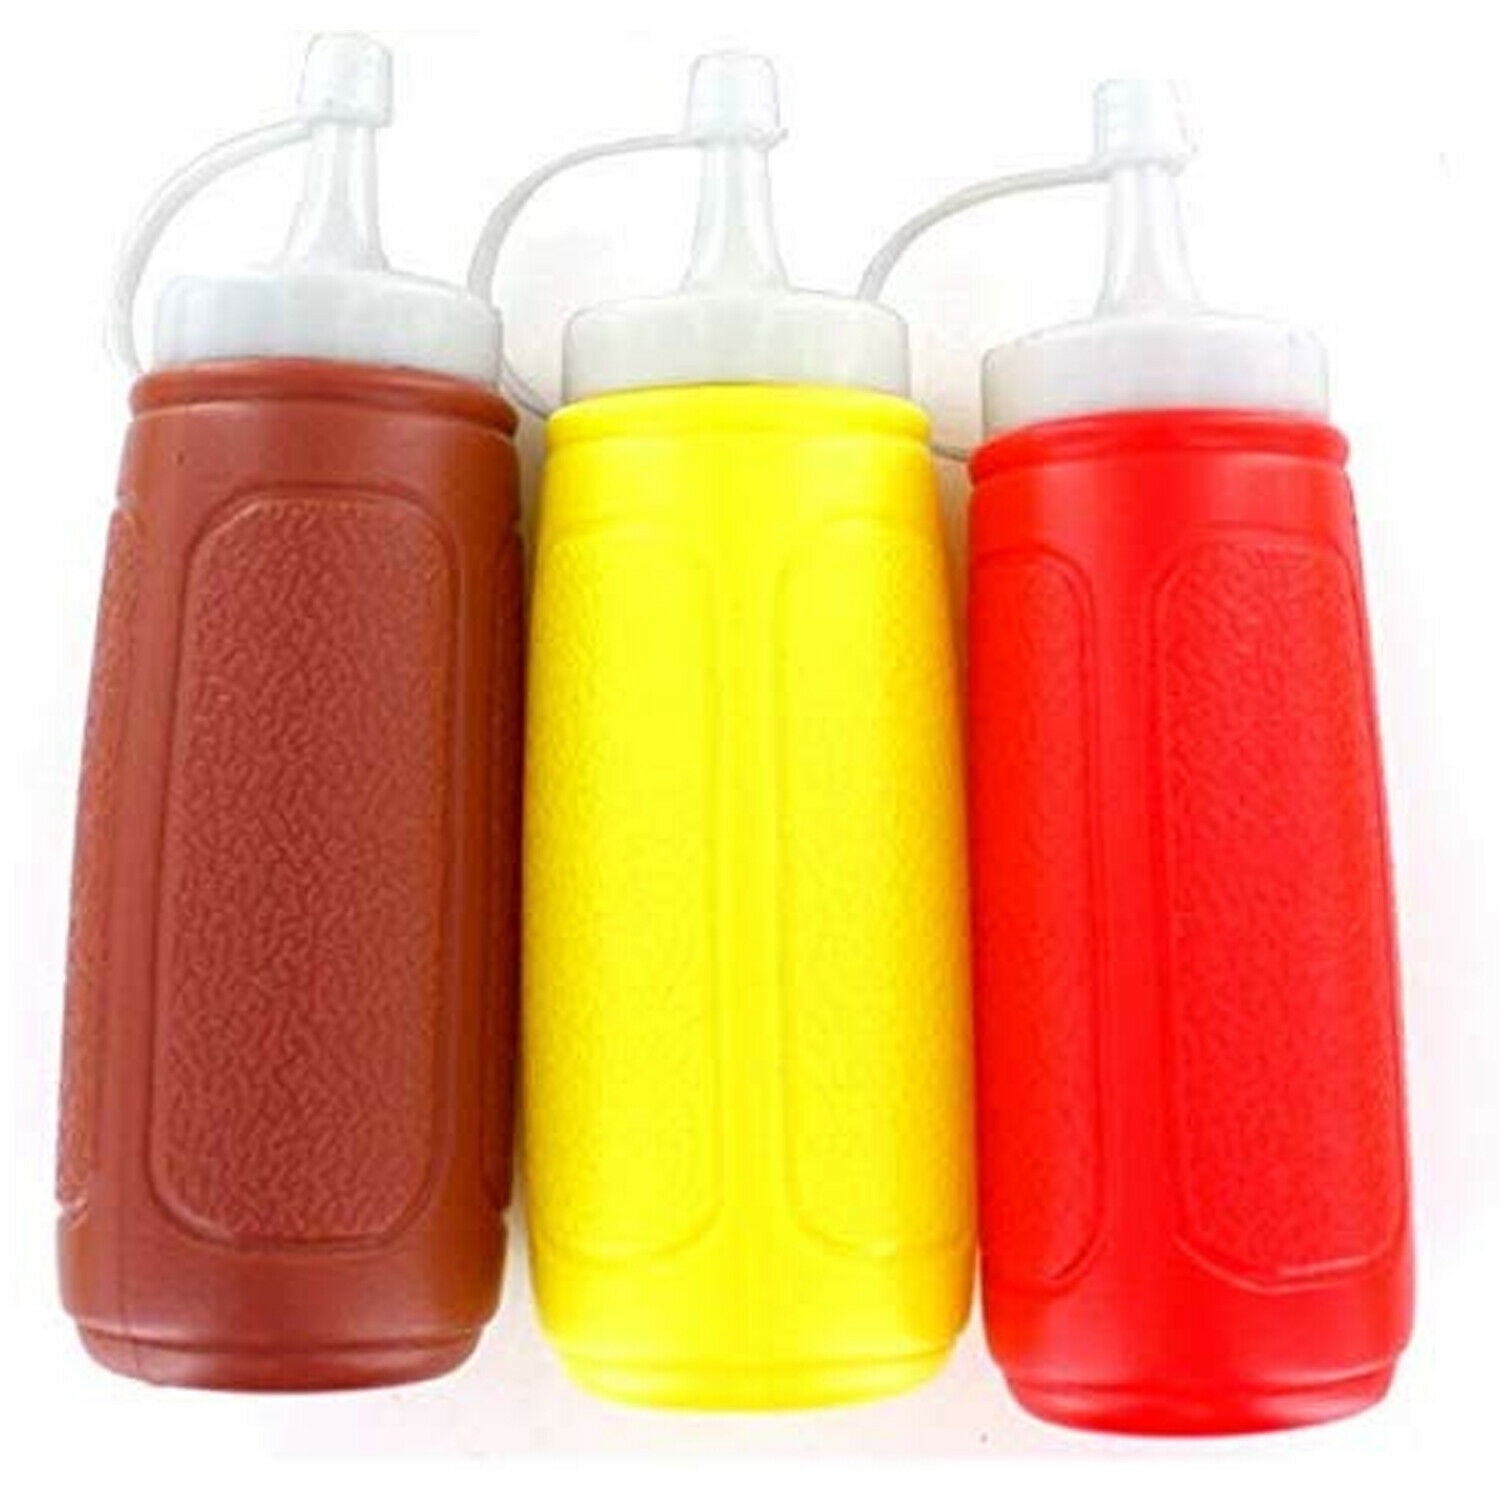 3pc Condiment Container Dispenser Picnic Set Ketchup Mustard BBQ Squeeze Bottles